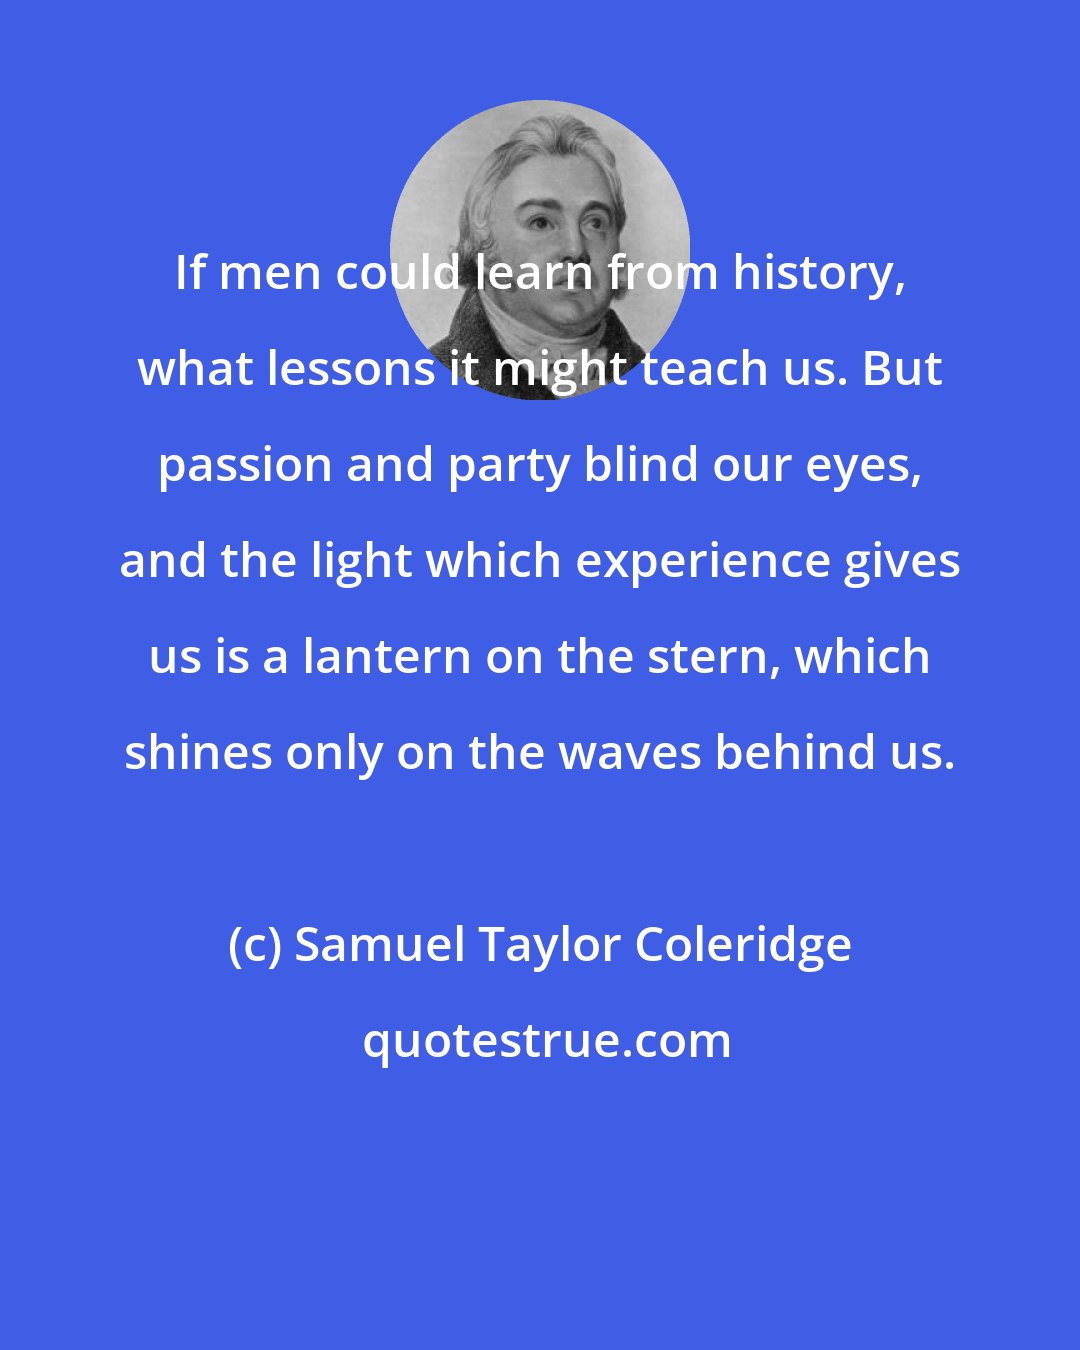 Samuel Taylor Coleridge: If men could learn from history, what lessons it might teach us. But passion and party blind our eyes, and the light which experience gives us is a lantern on the stern, which shines only on the waves behind us.